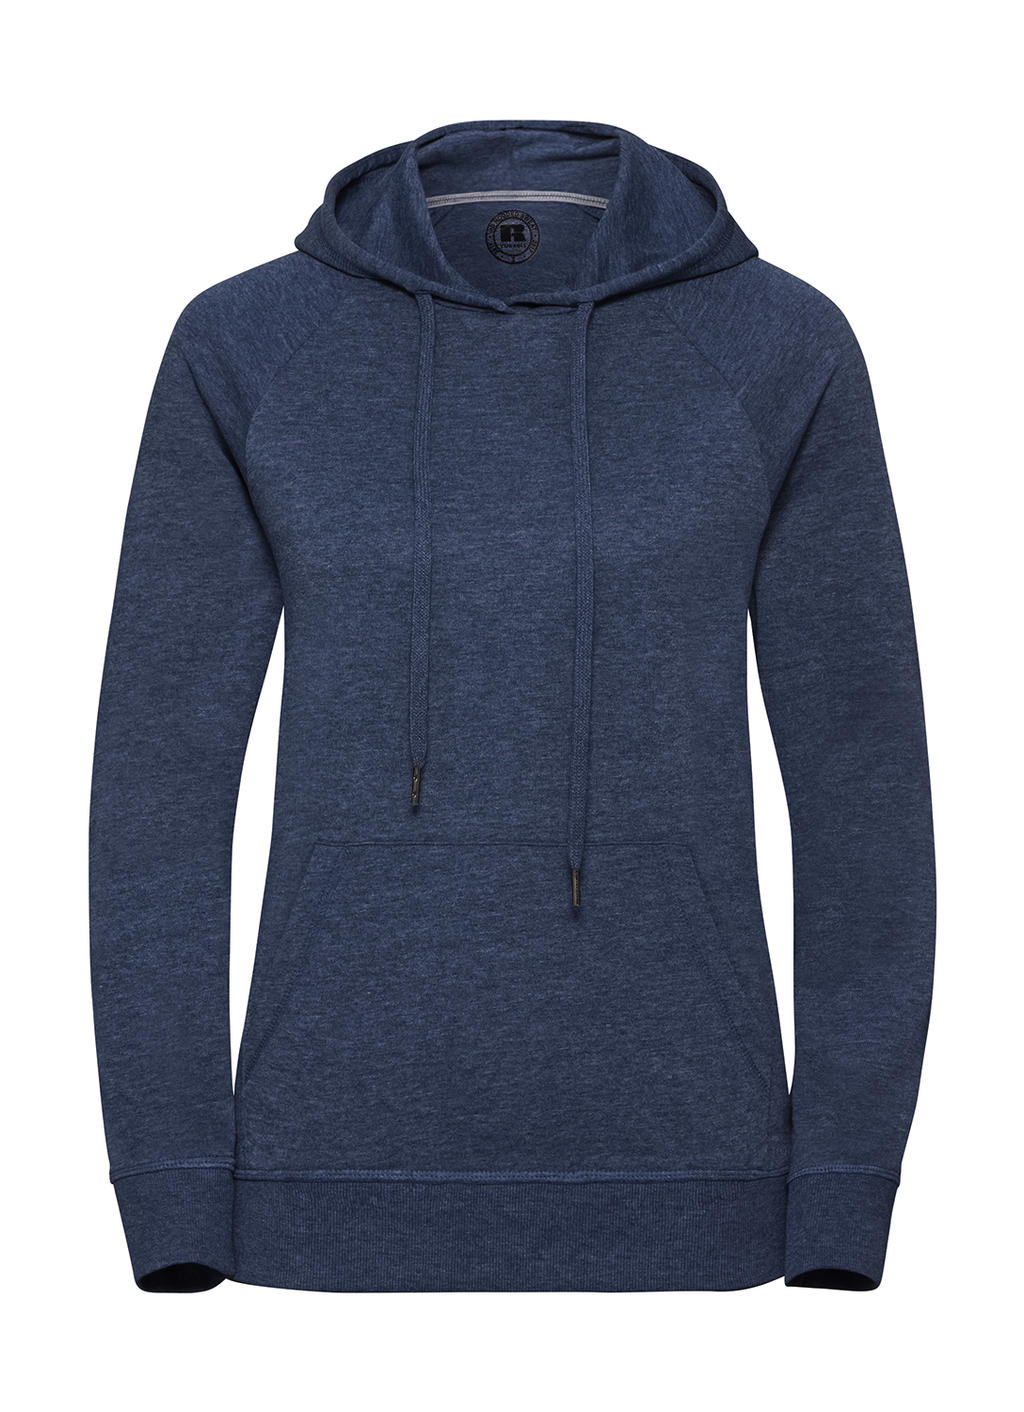  Ladies HD Hooded Sweat in Farbe Bright Navy Marl